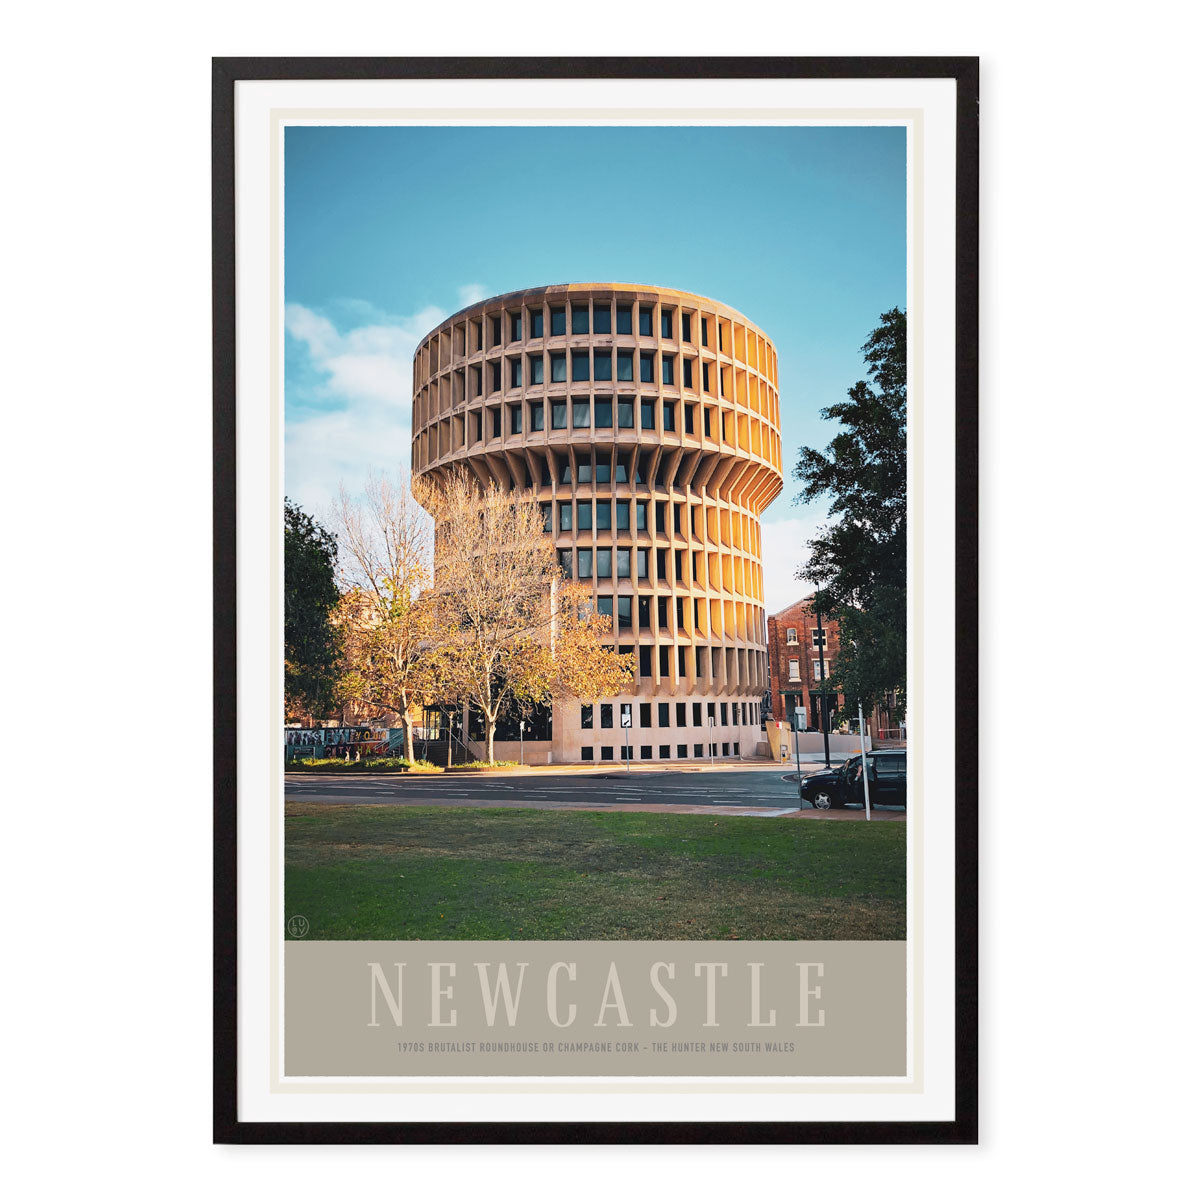 Newcastle NSW vintage retro travel poster print in black frame from Places We Luv